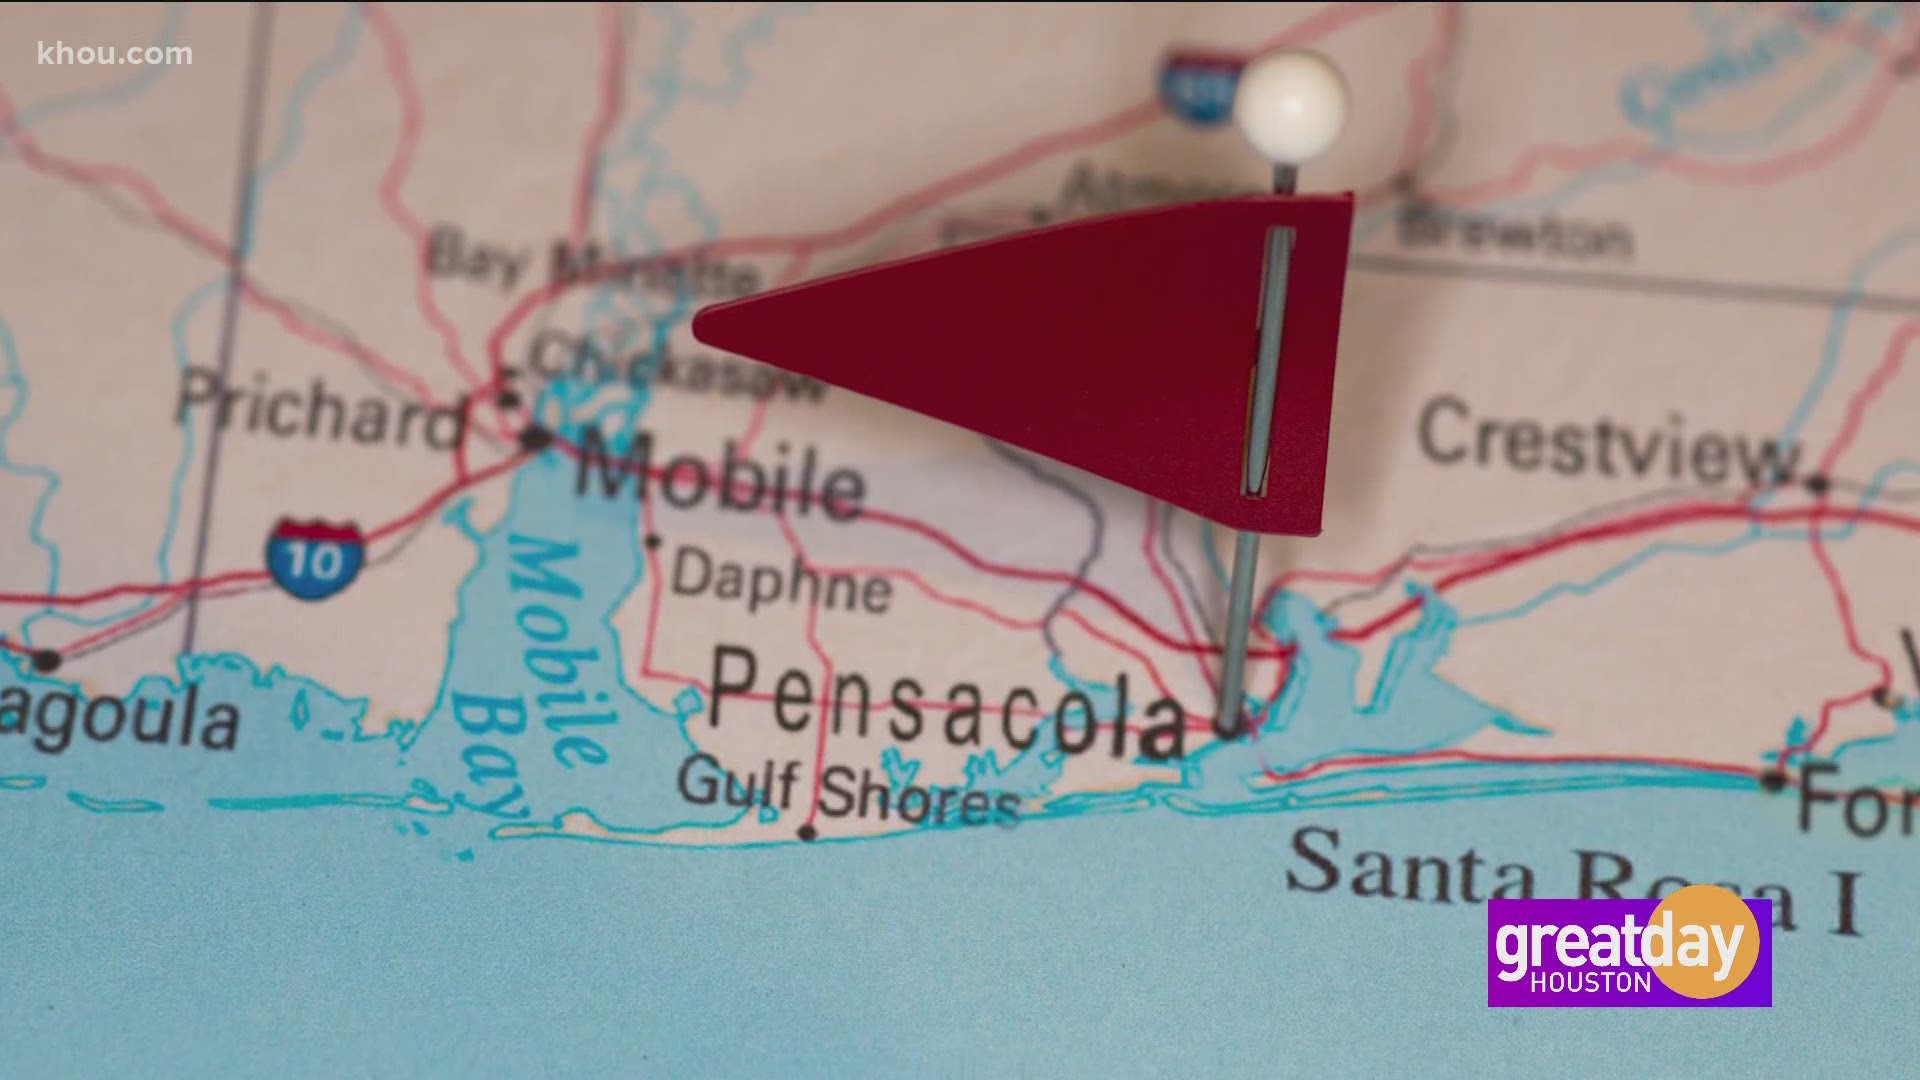 Nicole Stacey shares why now is the perfect time to visit the beautiful beaches in Pensacola